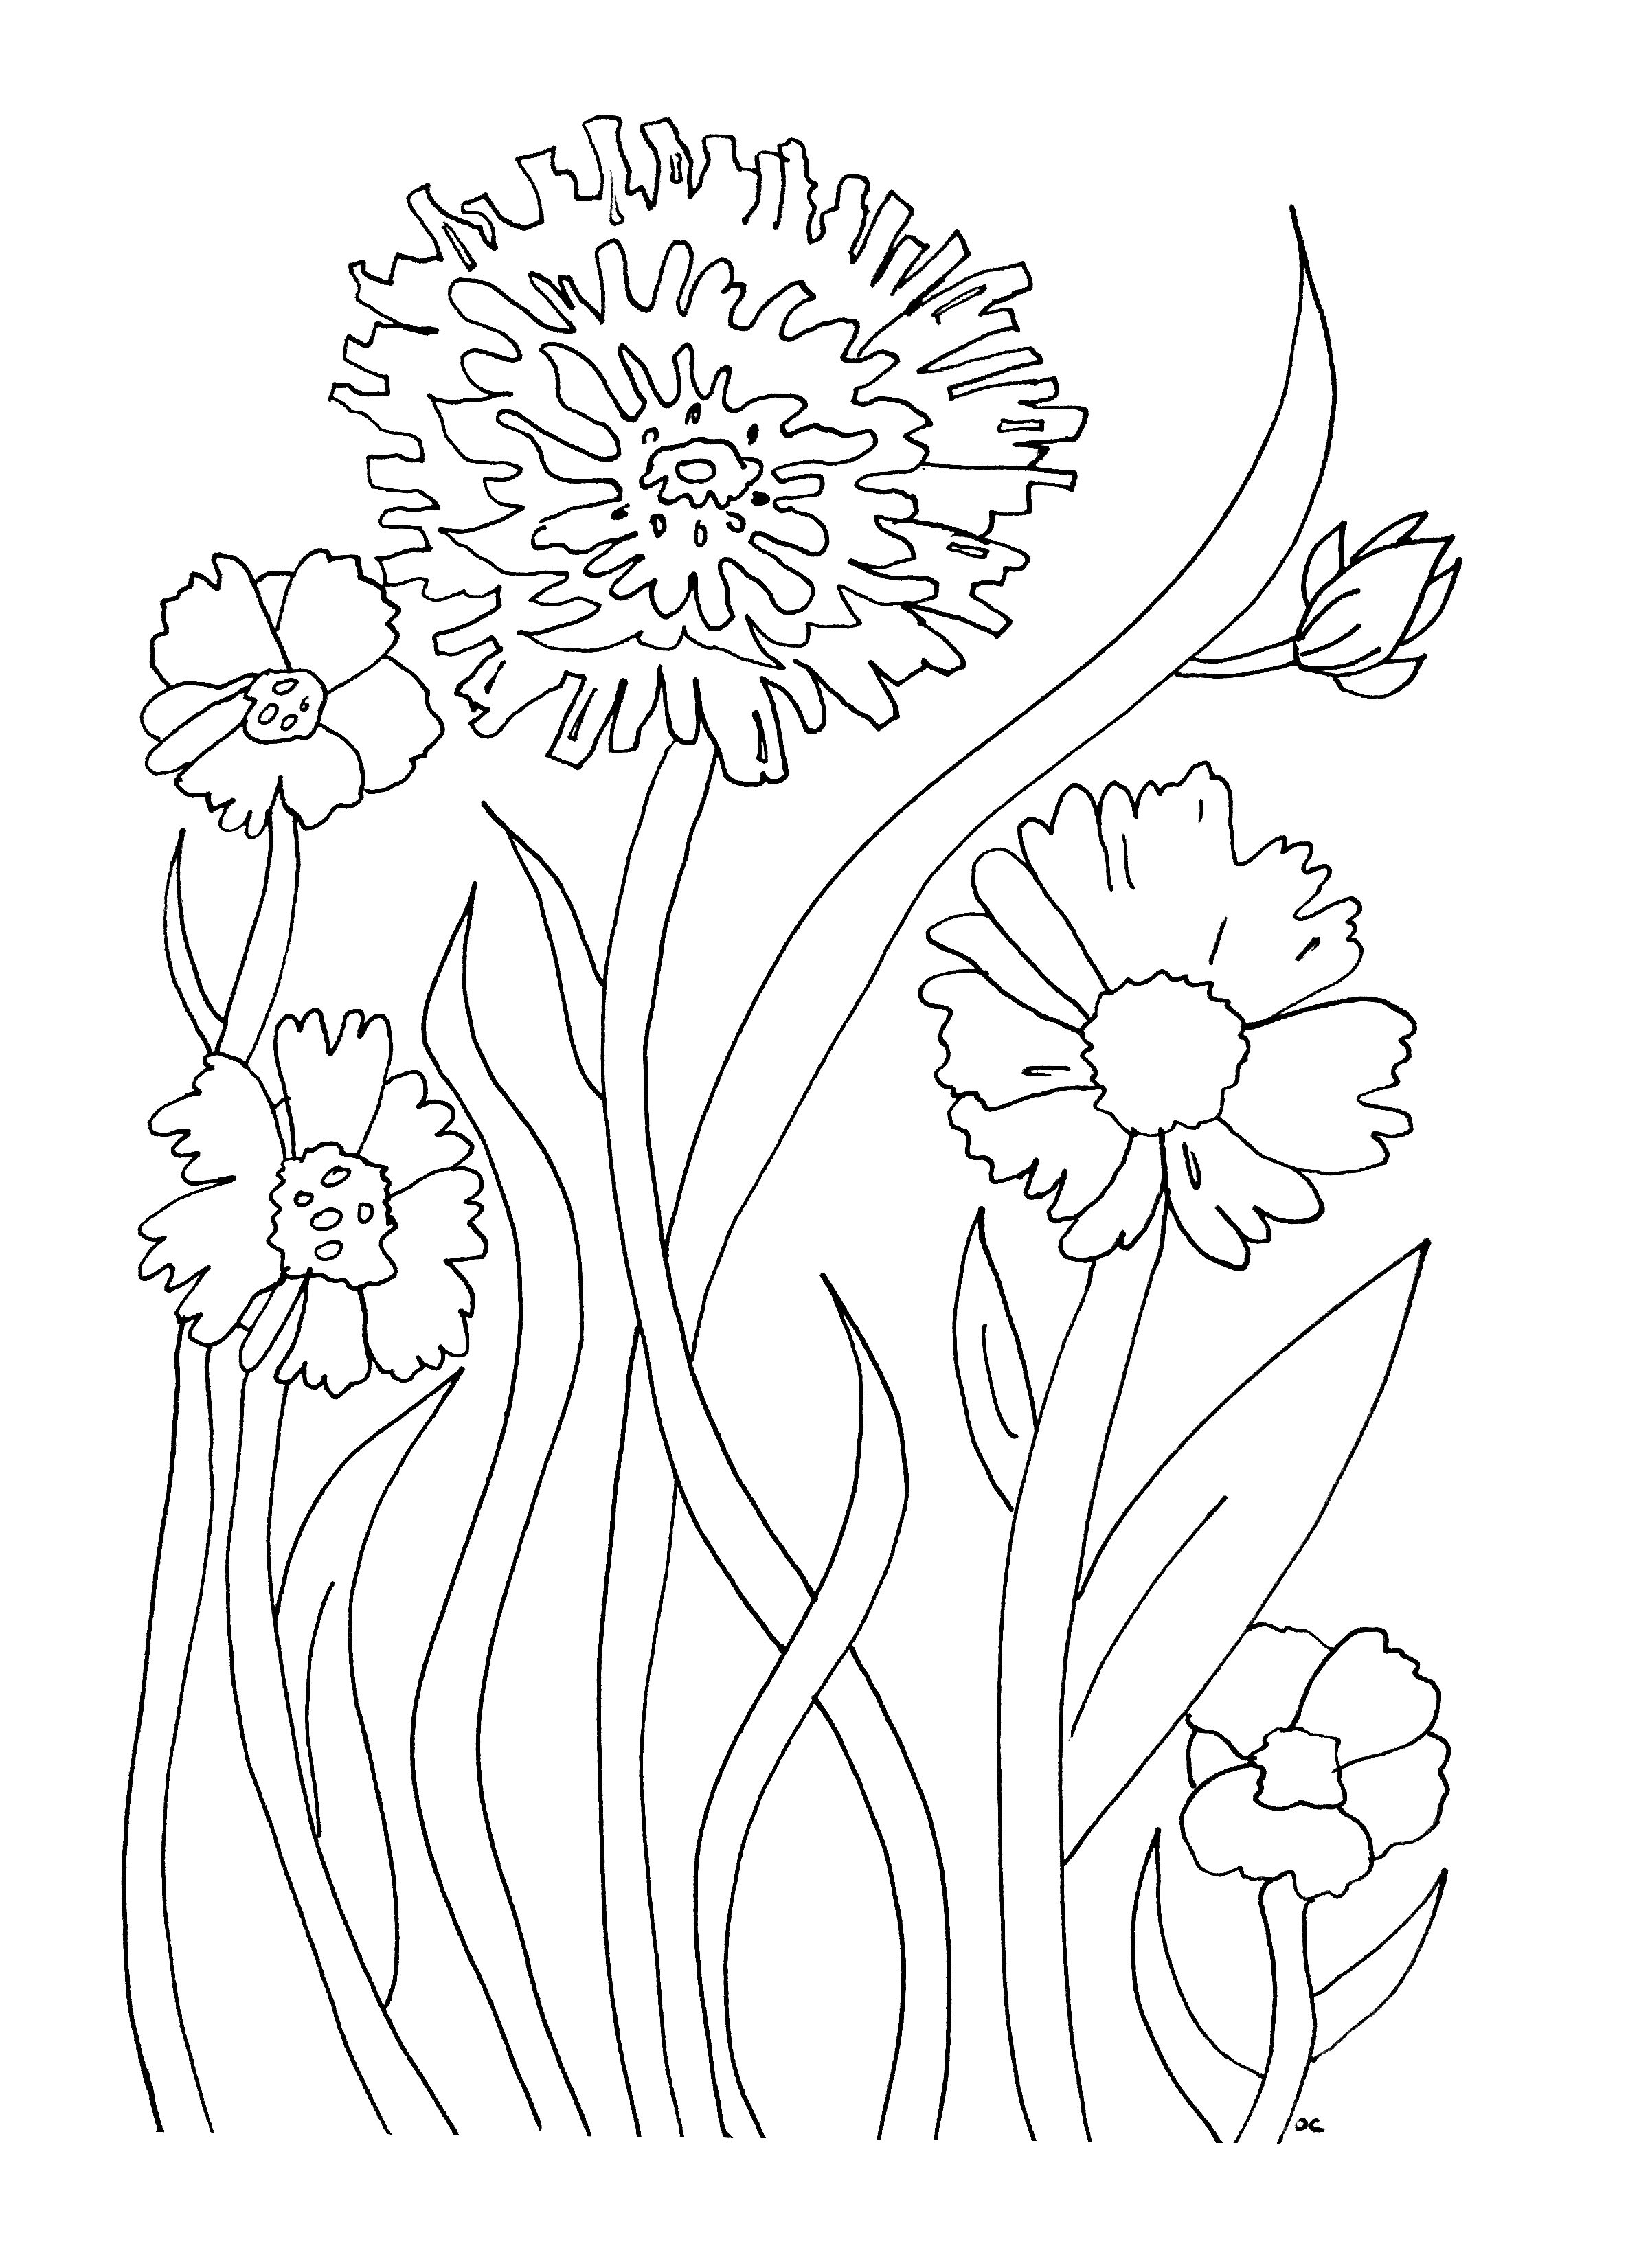 free coloring flower by number